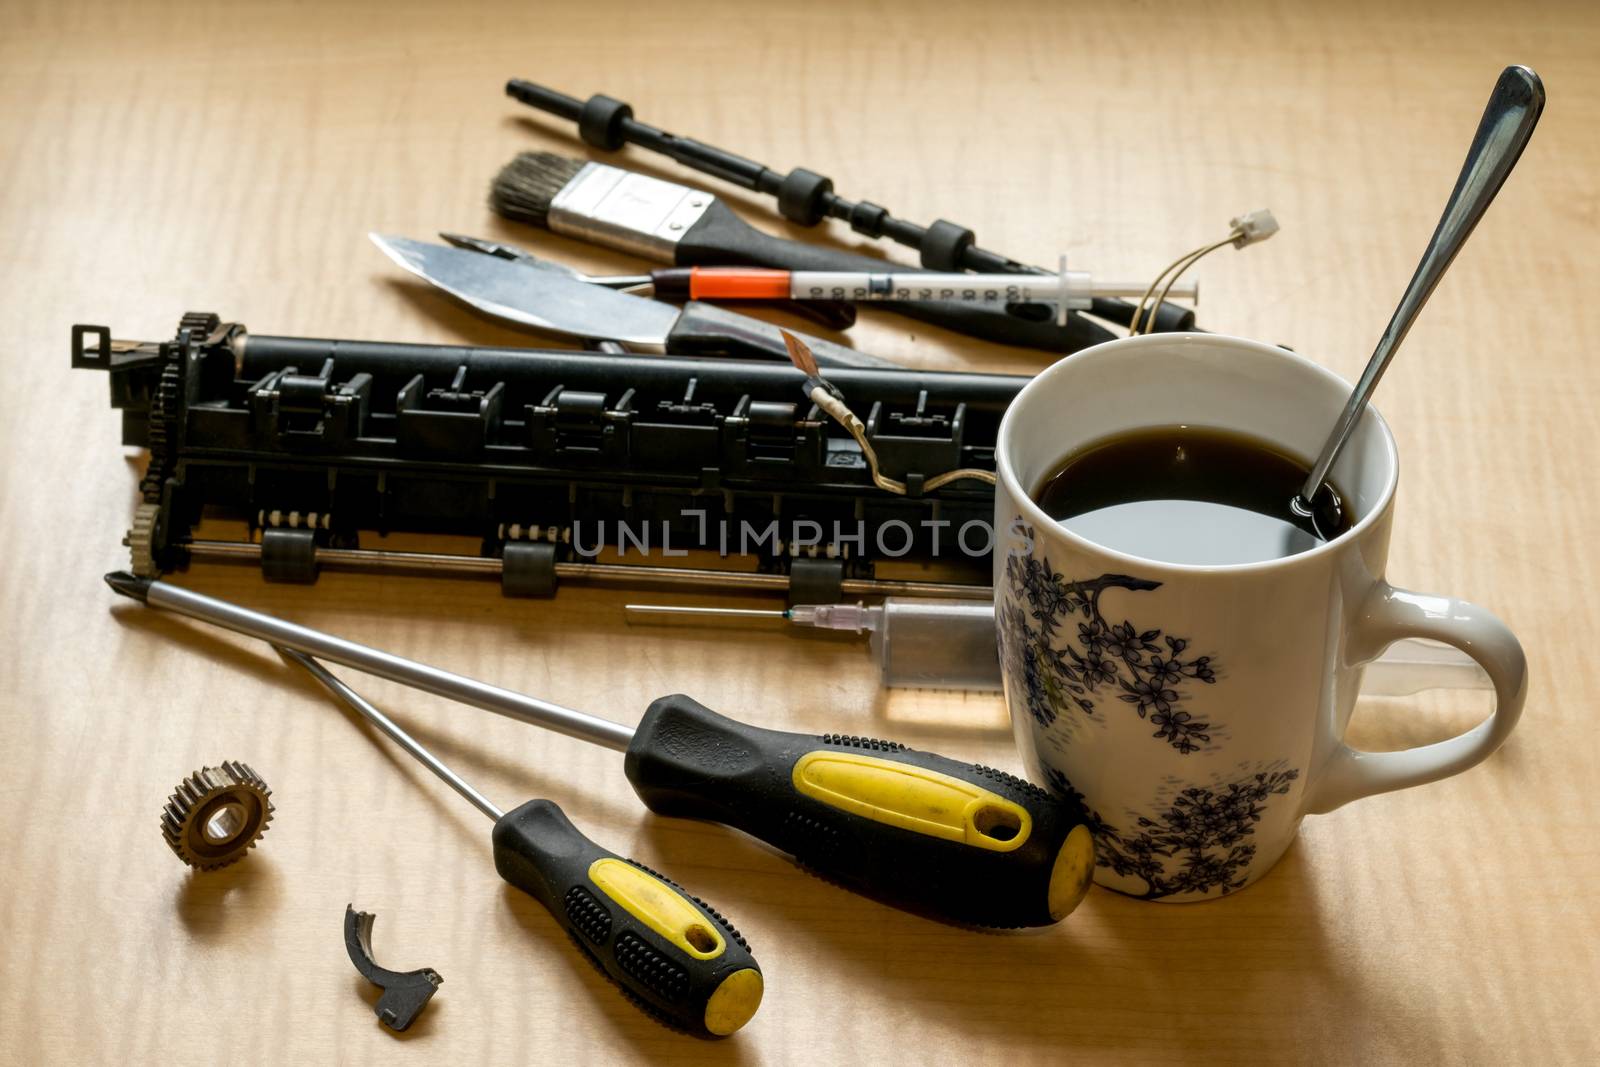 printer parts, tools, grease, broken gear and coffee mug on the table by jk3030